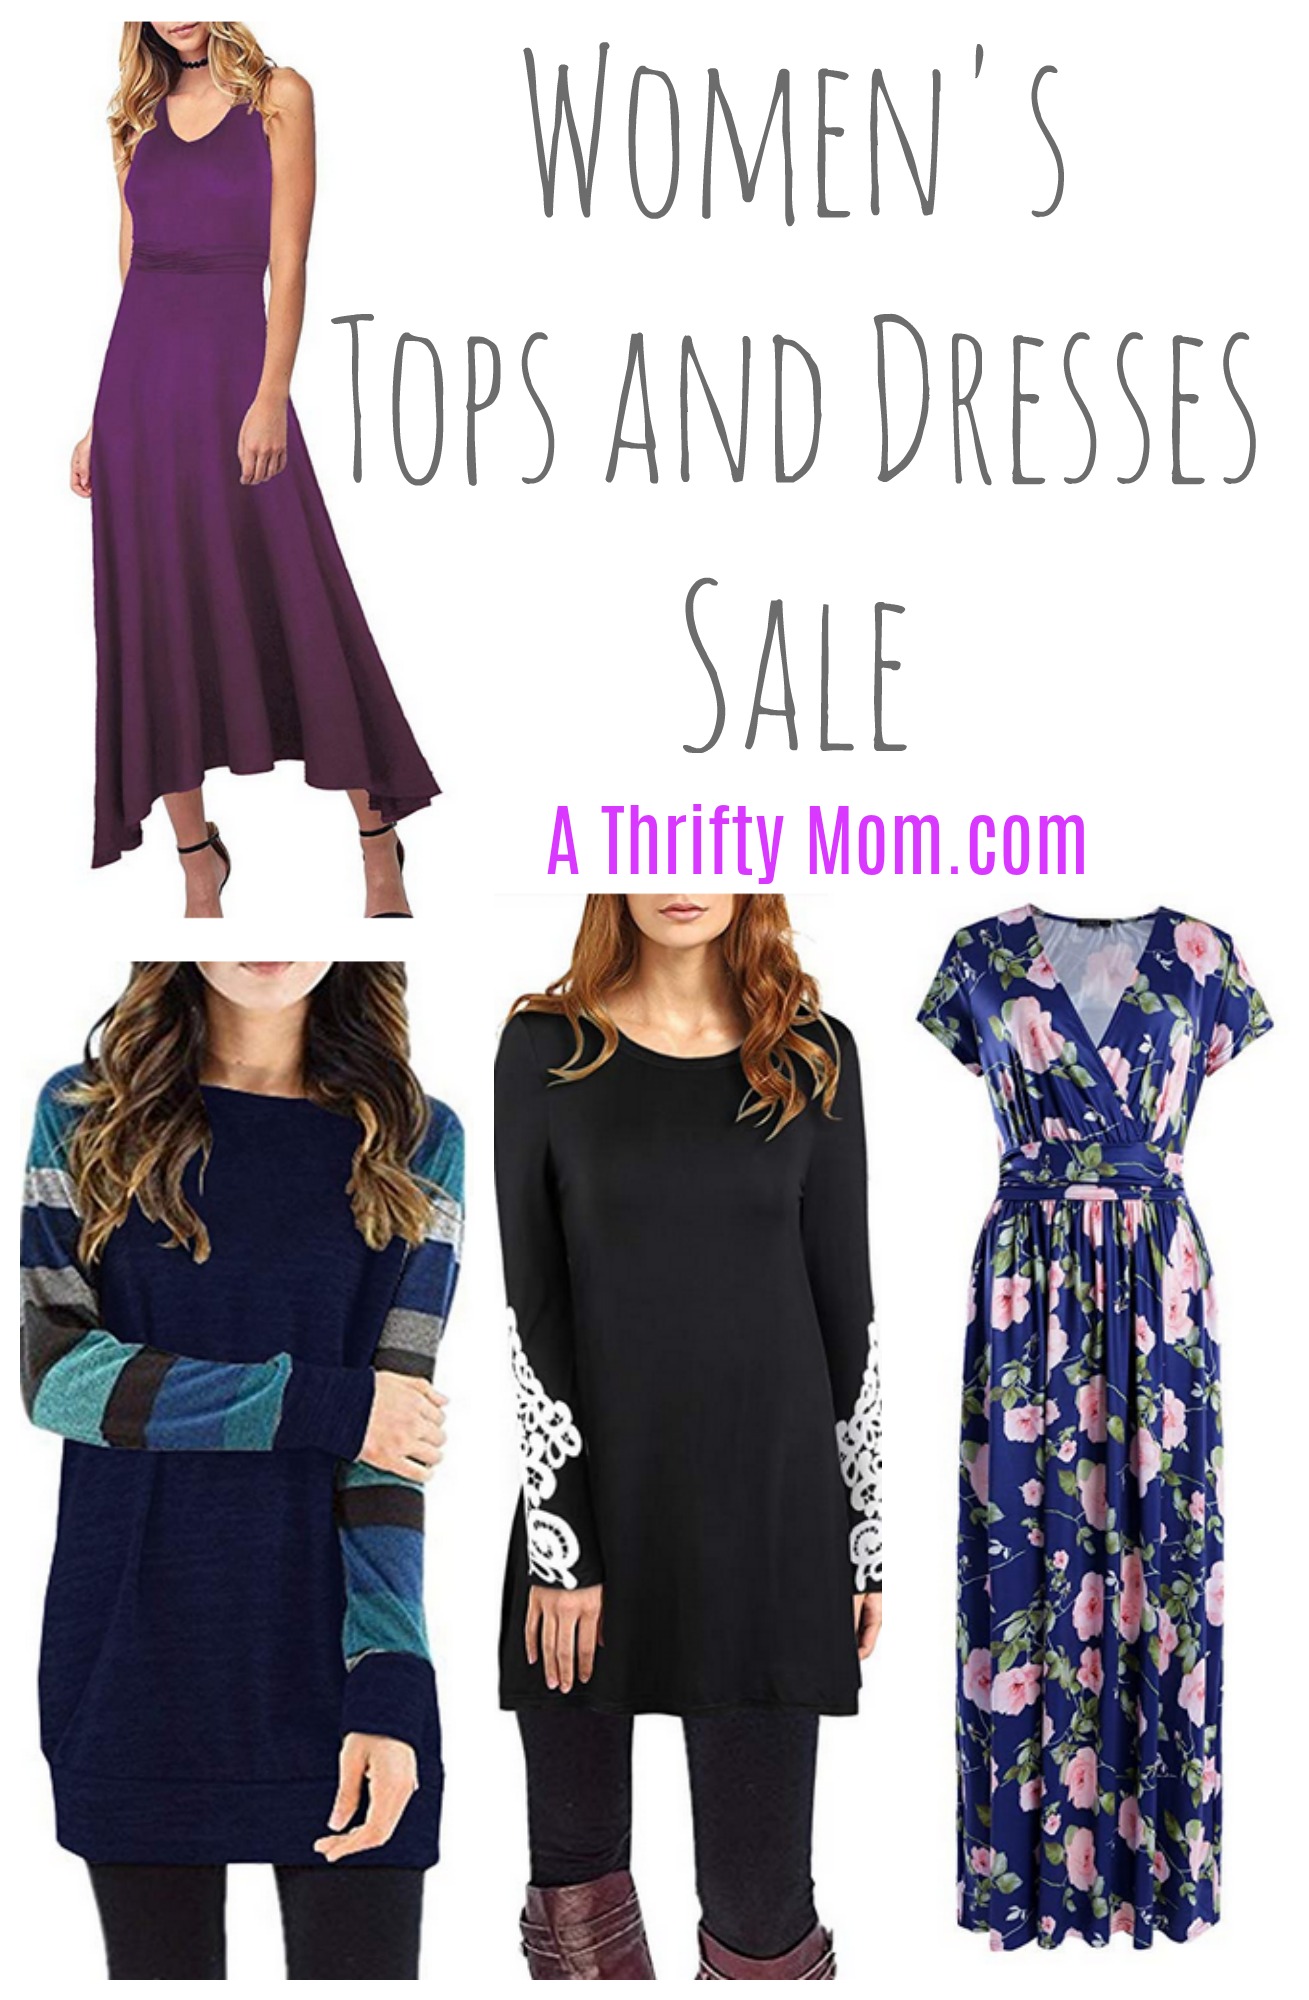 Women's Tops and Dresses Sale